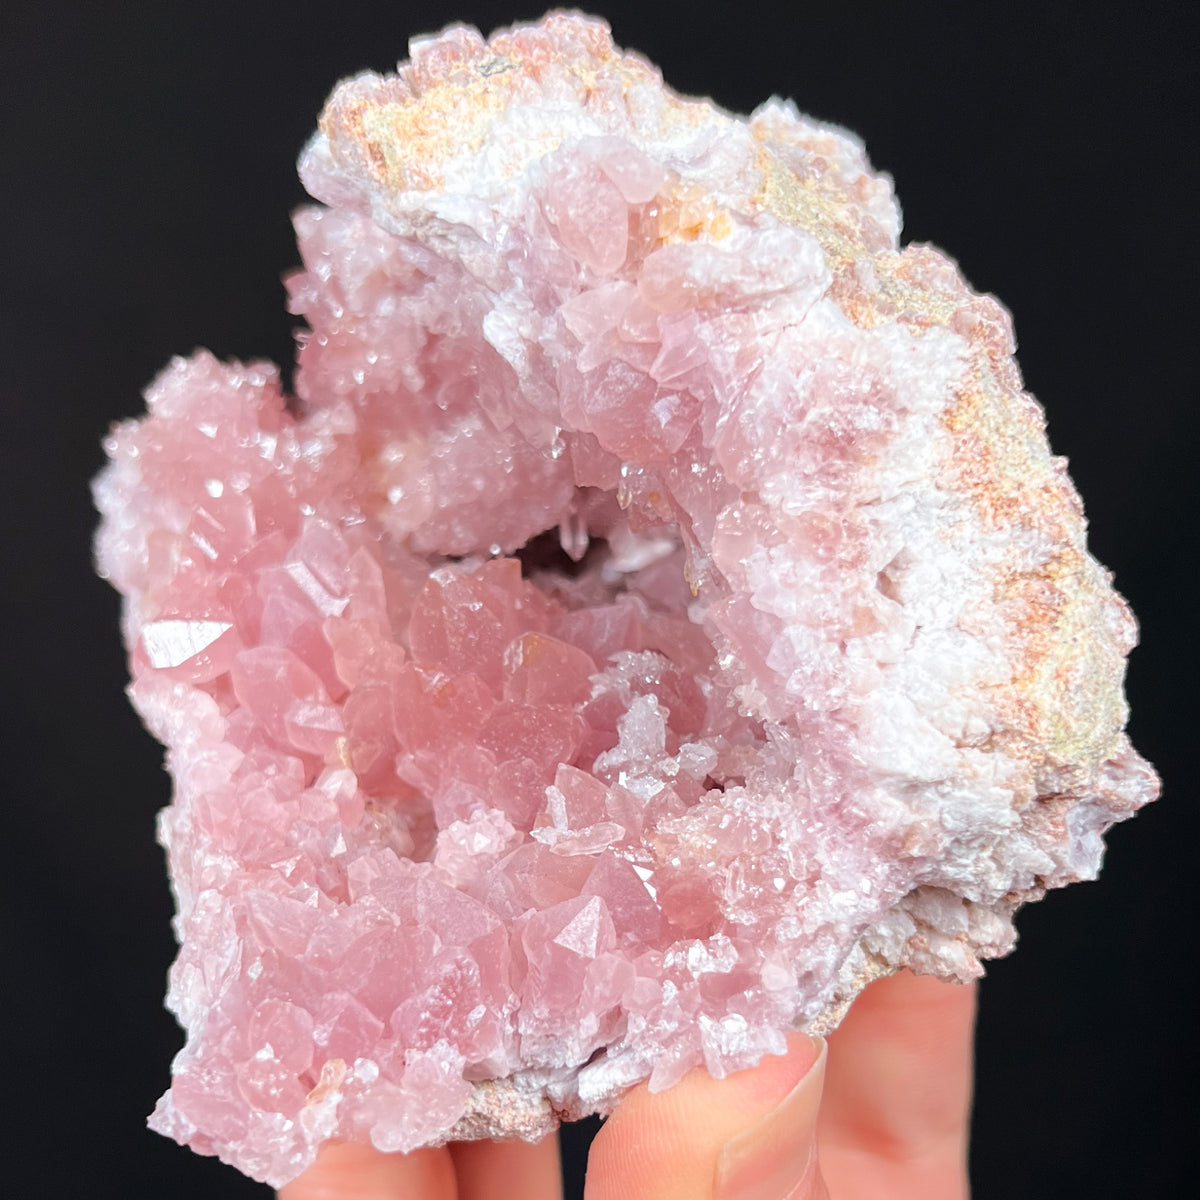 Pink Amethyst Iron-Included Quartz Crystals